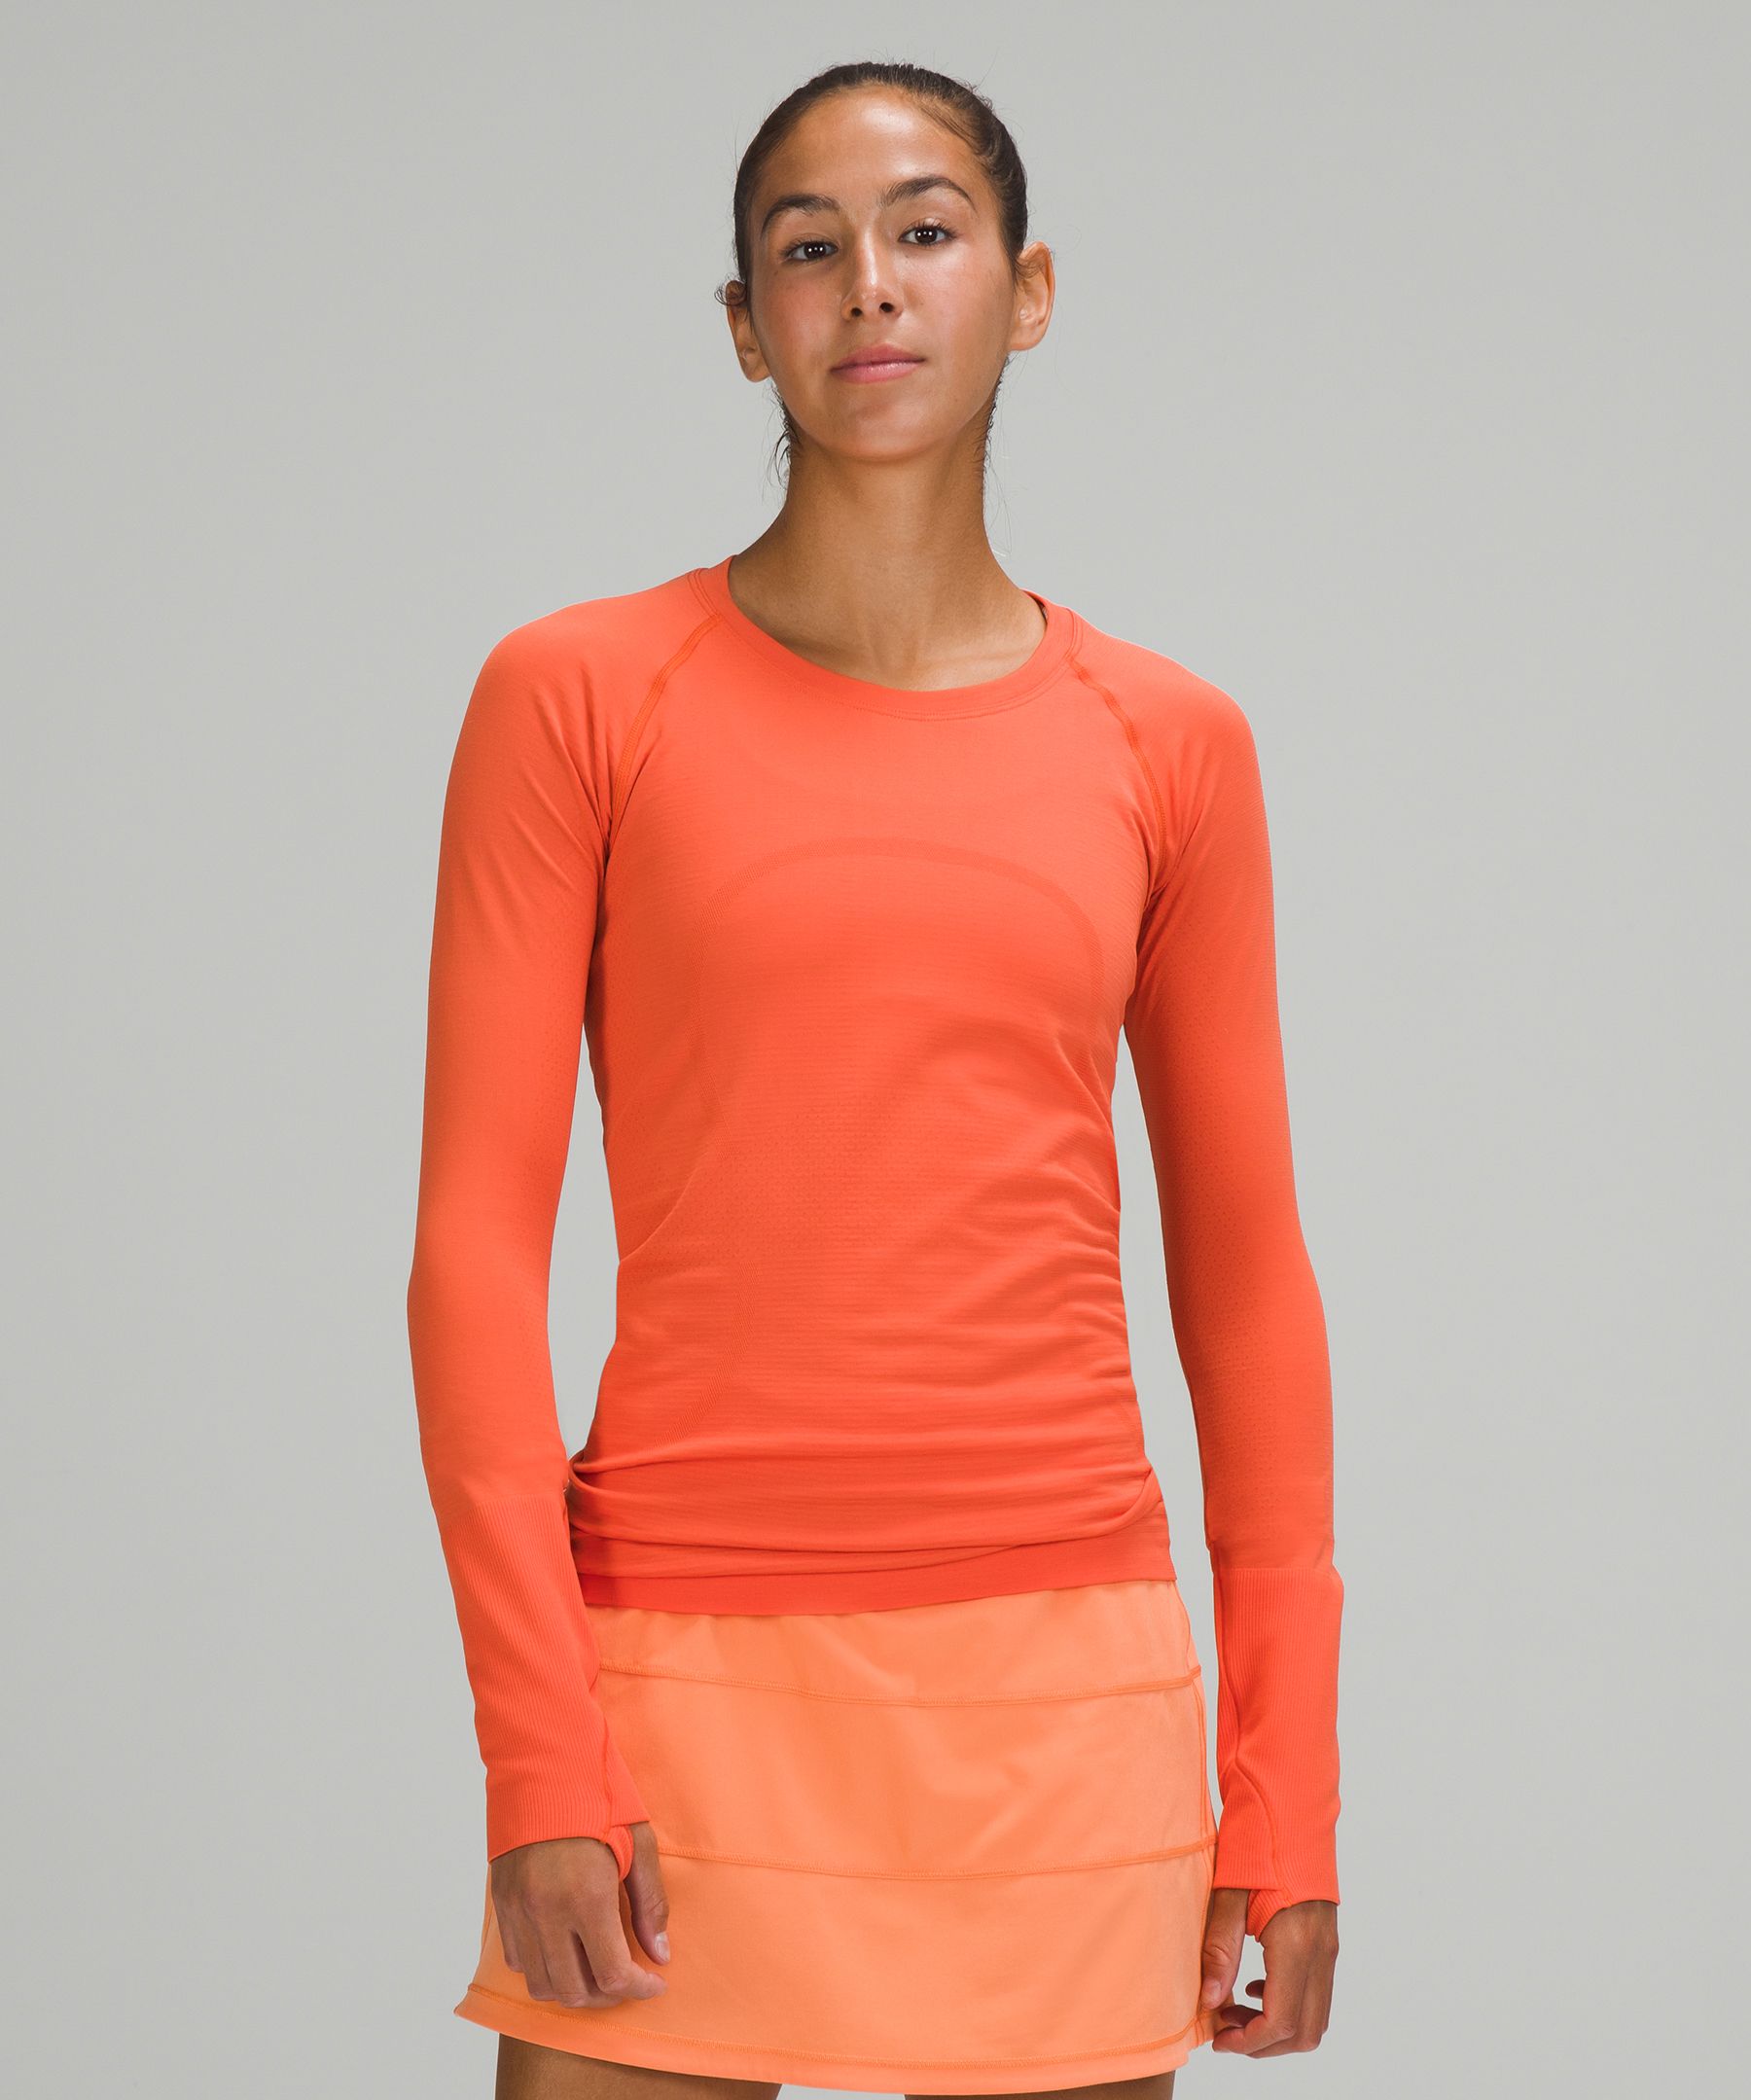 Lululemon Swiftly Tech Long Sleeve Shirt 2.0 In Warm Coral/warm Coral